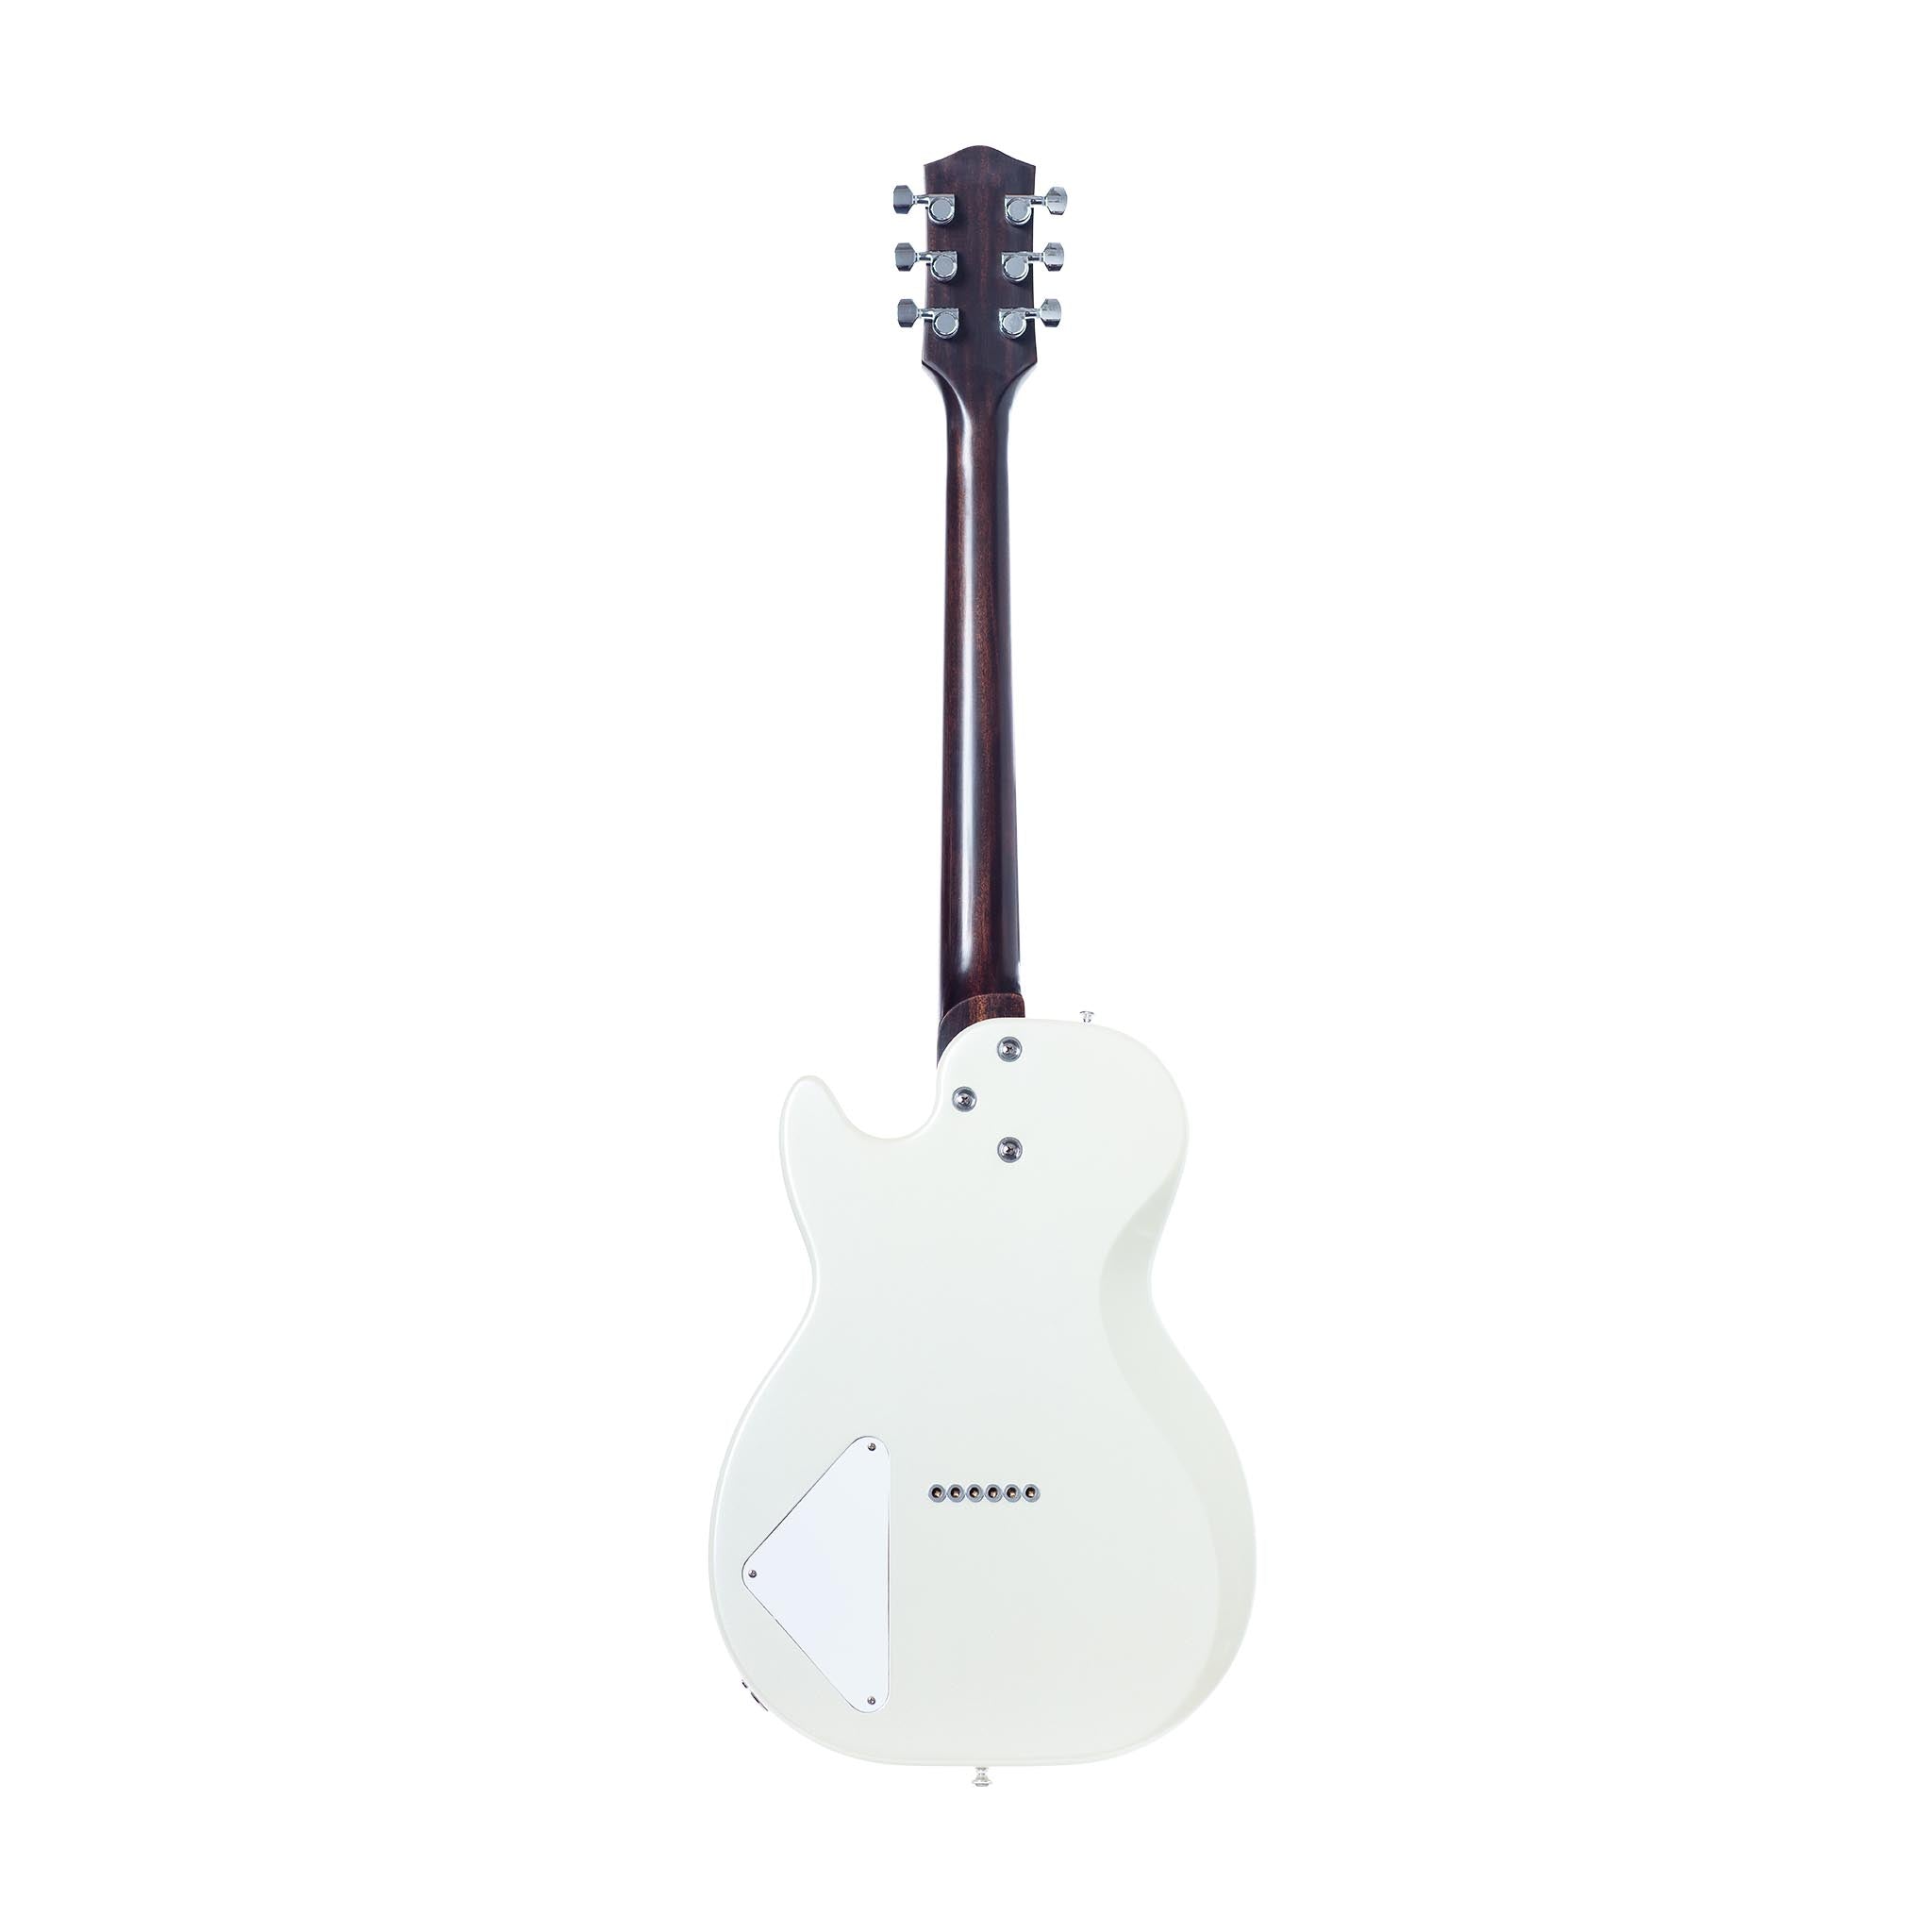 Left Handed Electric Guitar White Body Gold Hardware Standard Adult Size